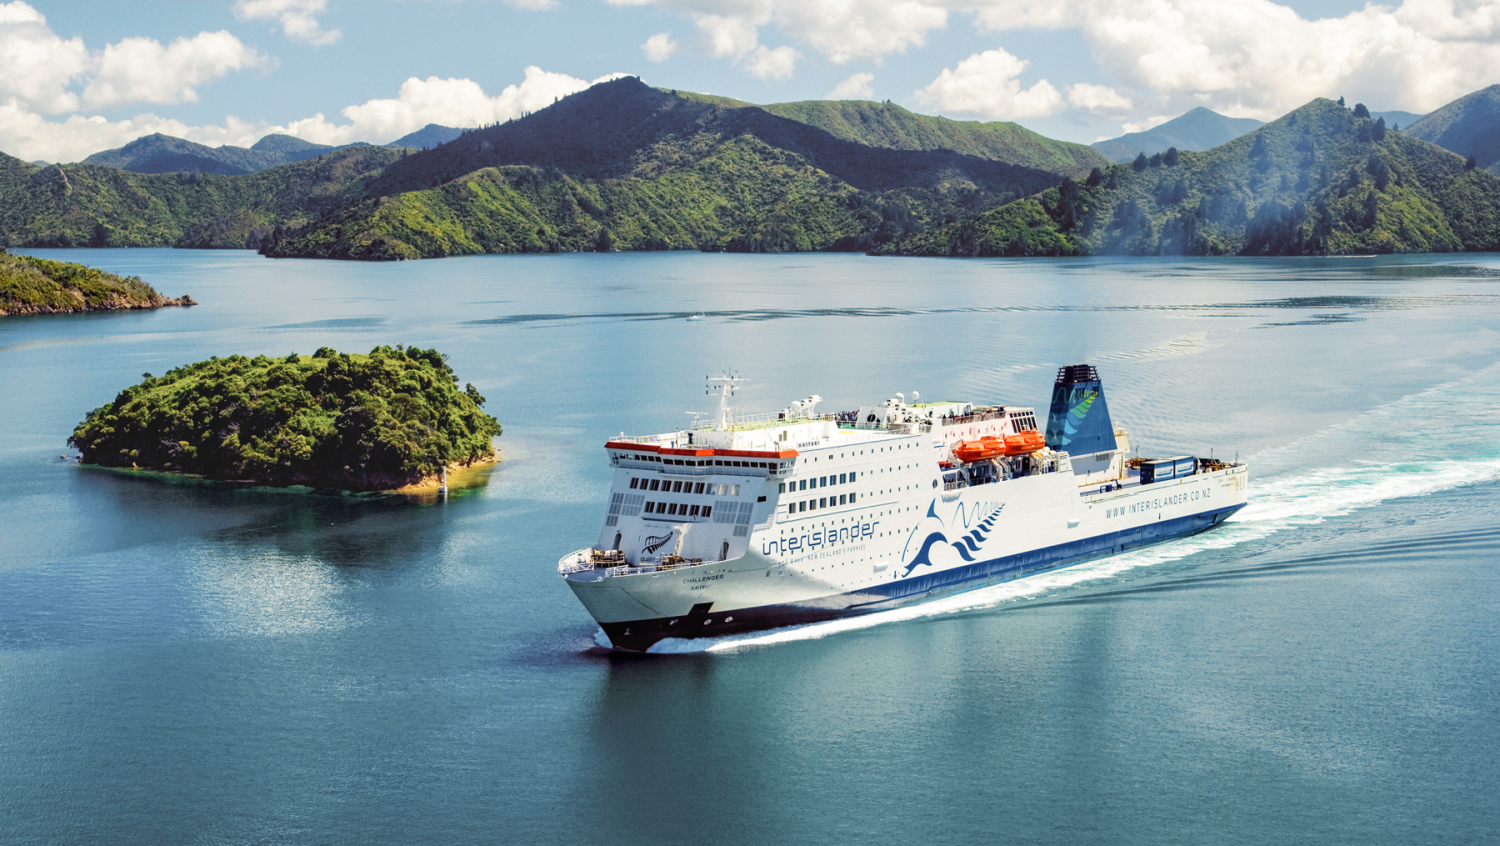 Image for Unmatched beauty: Cross Cook Strait with Interislander Ferry